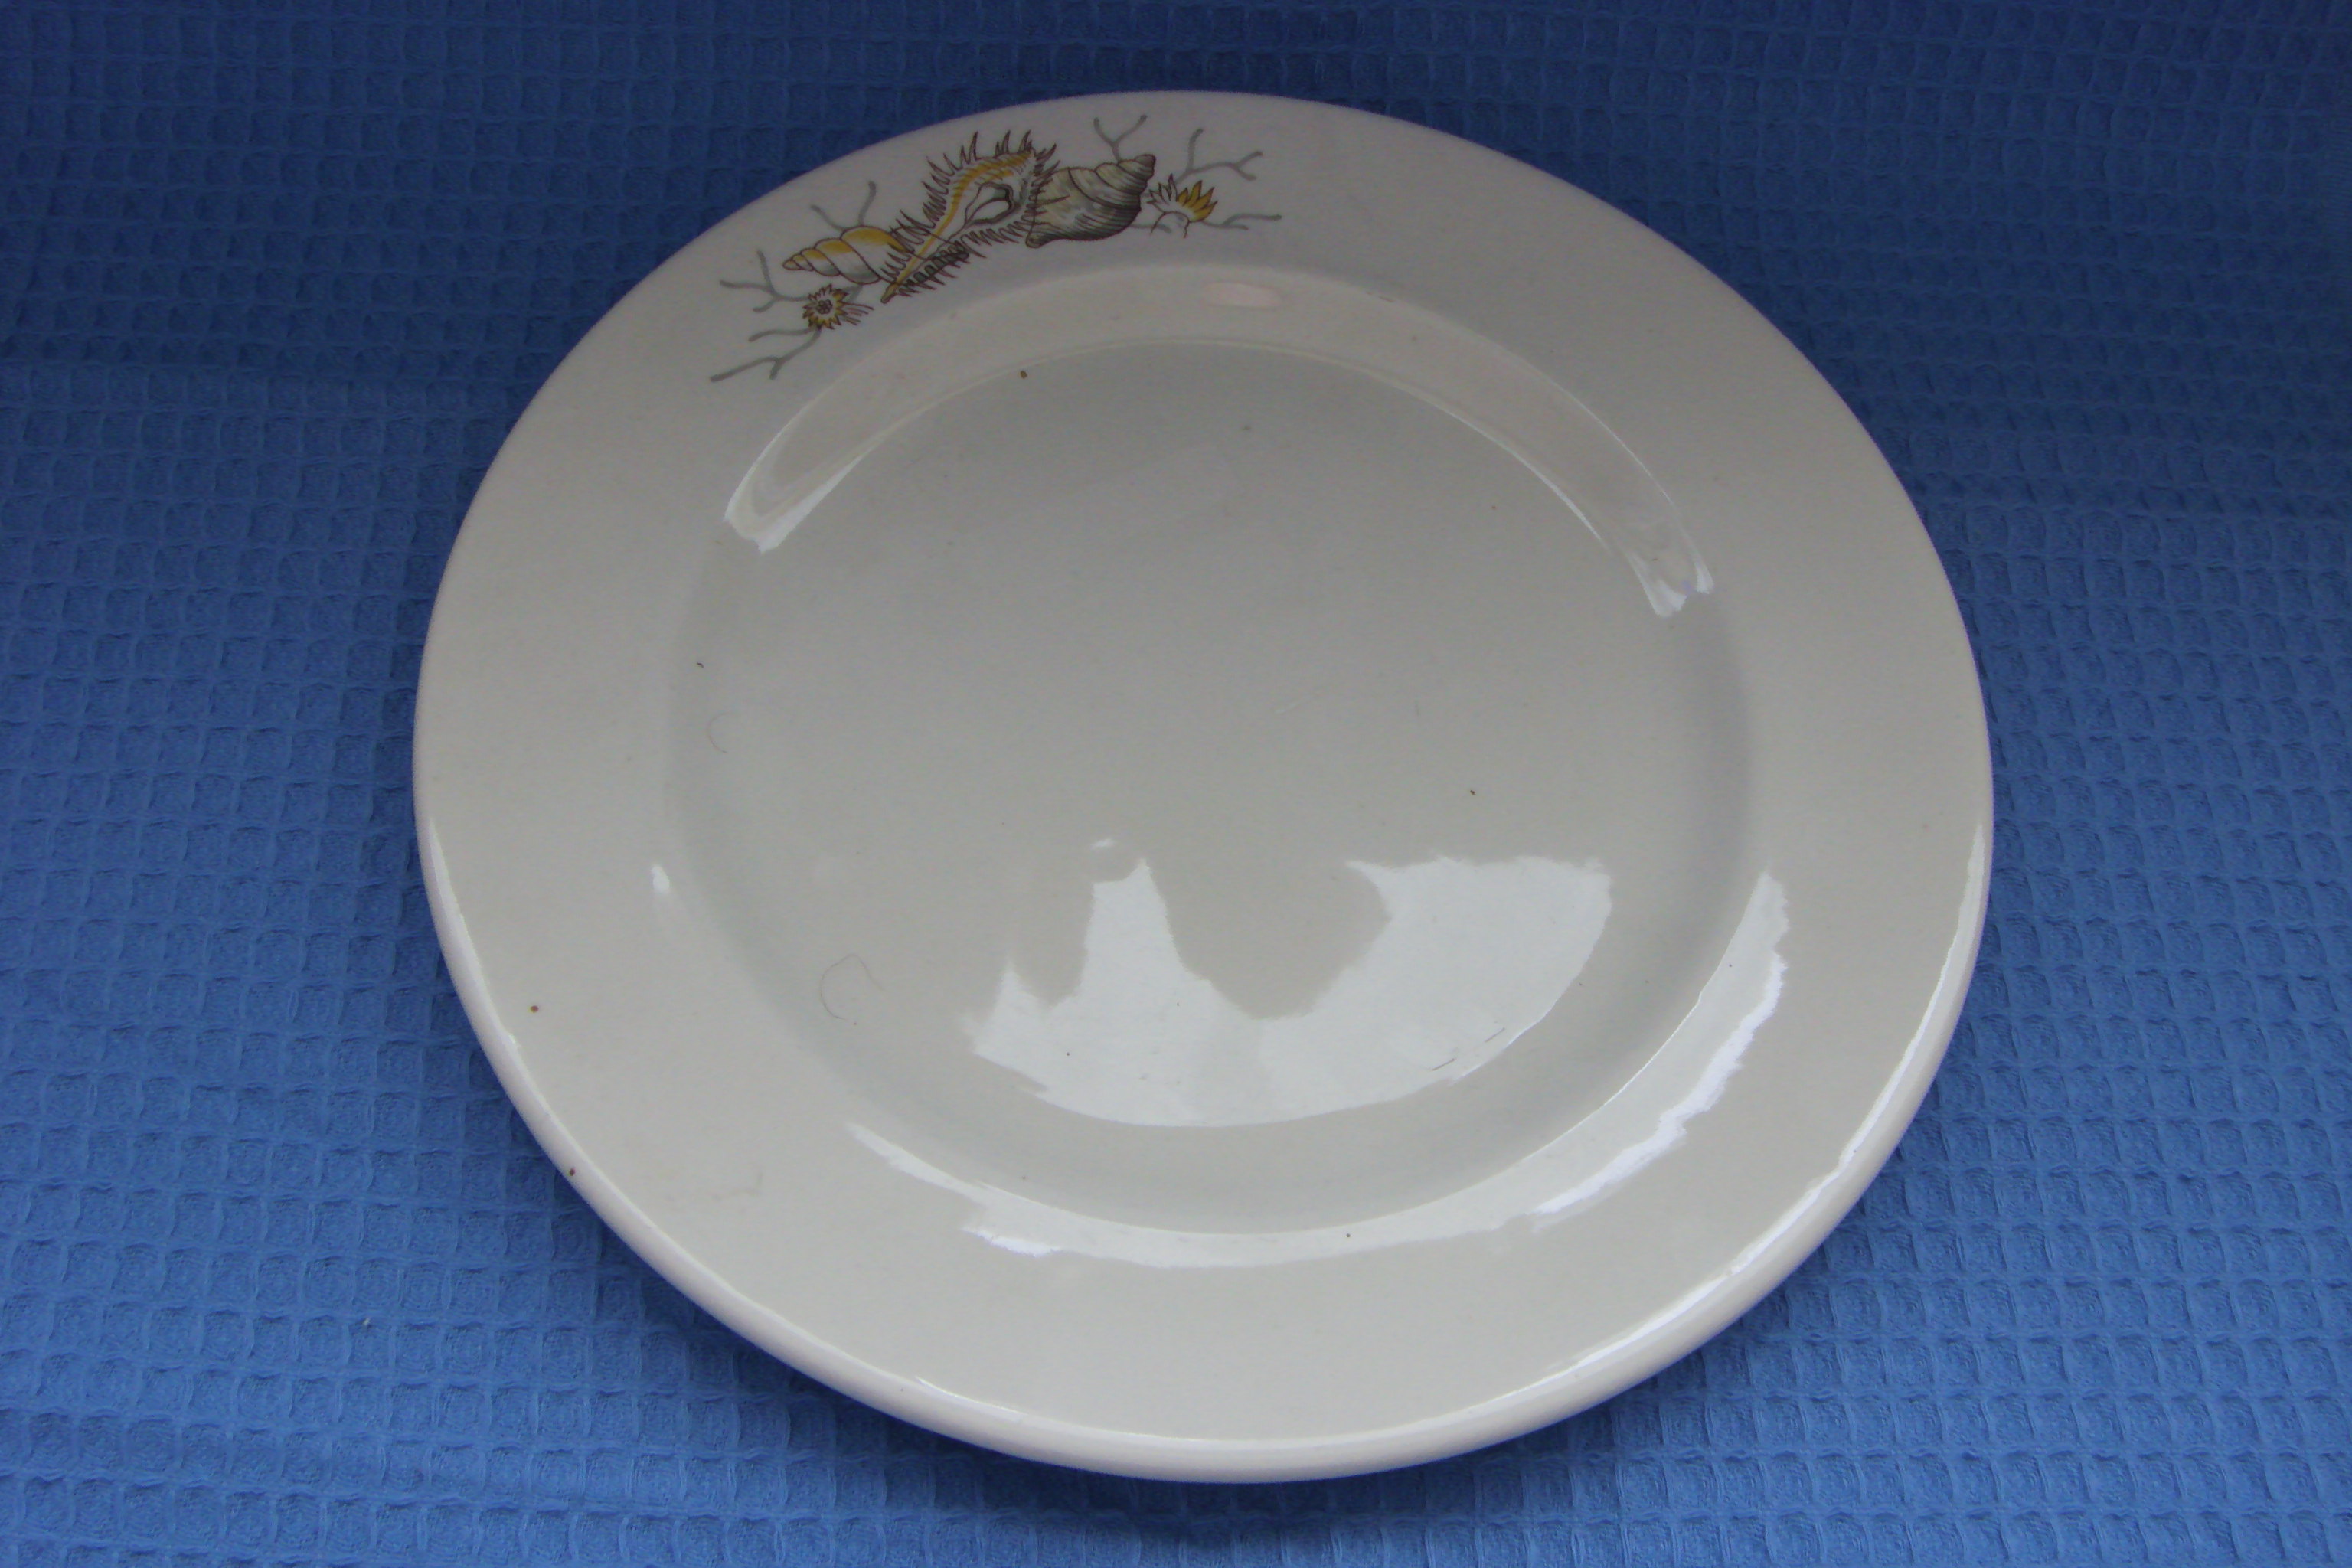 SEASHELL DESIGN MEDIUM SIZE PLATE FROM THE ORIENT LINE